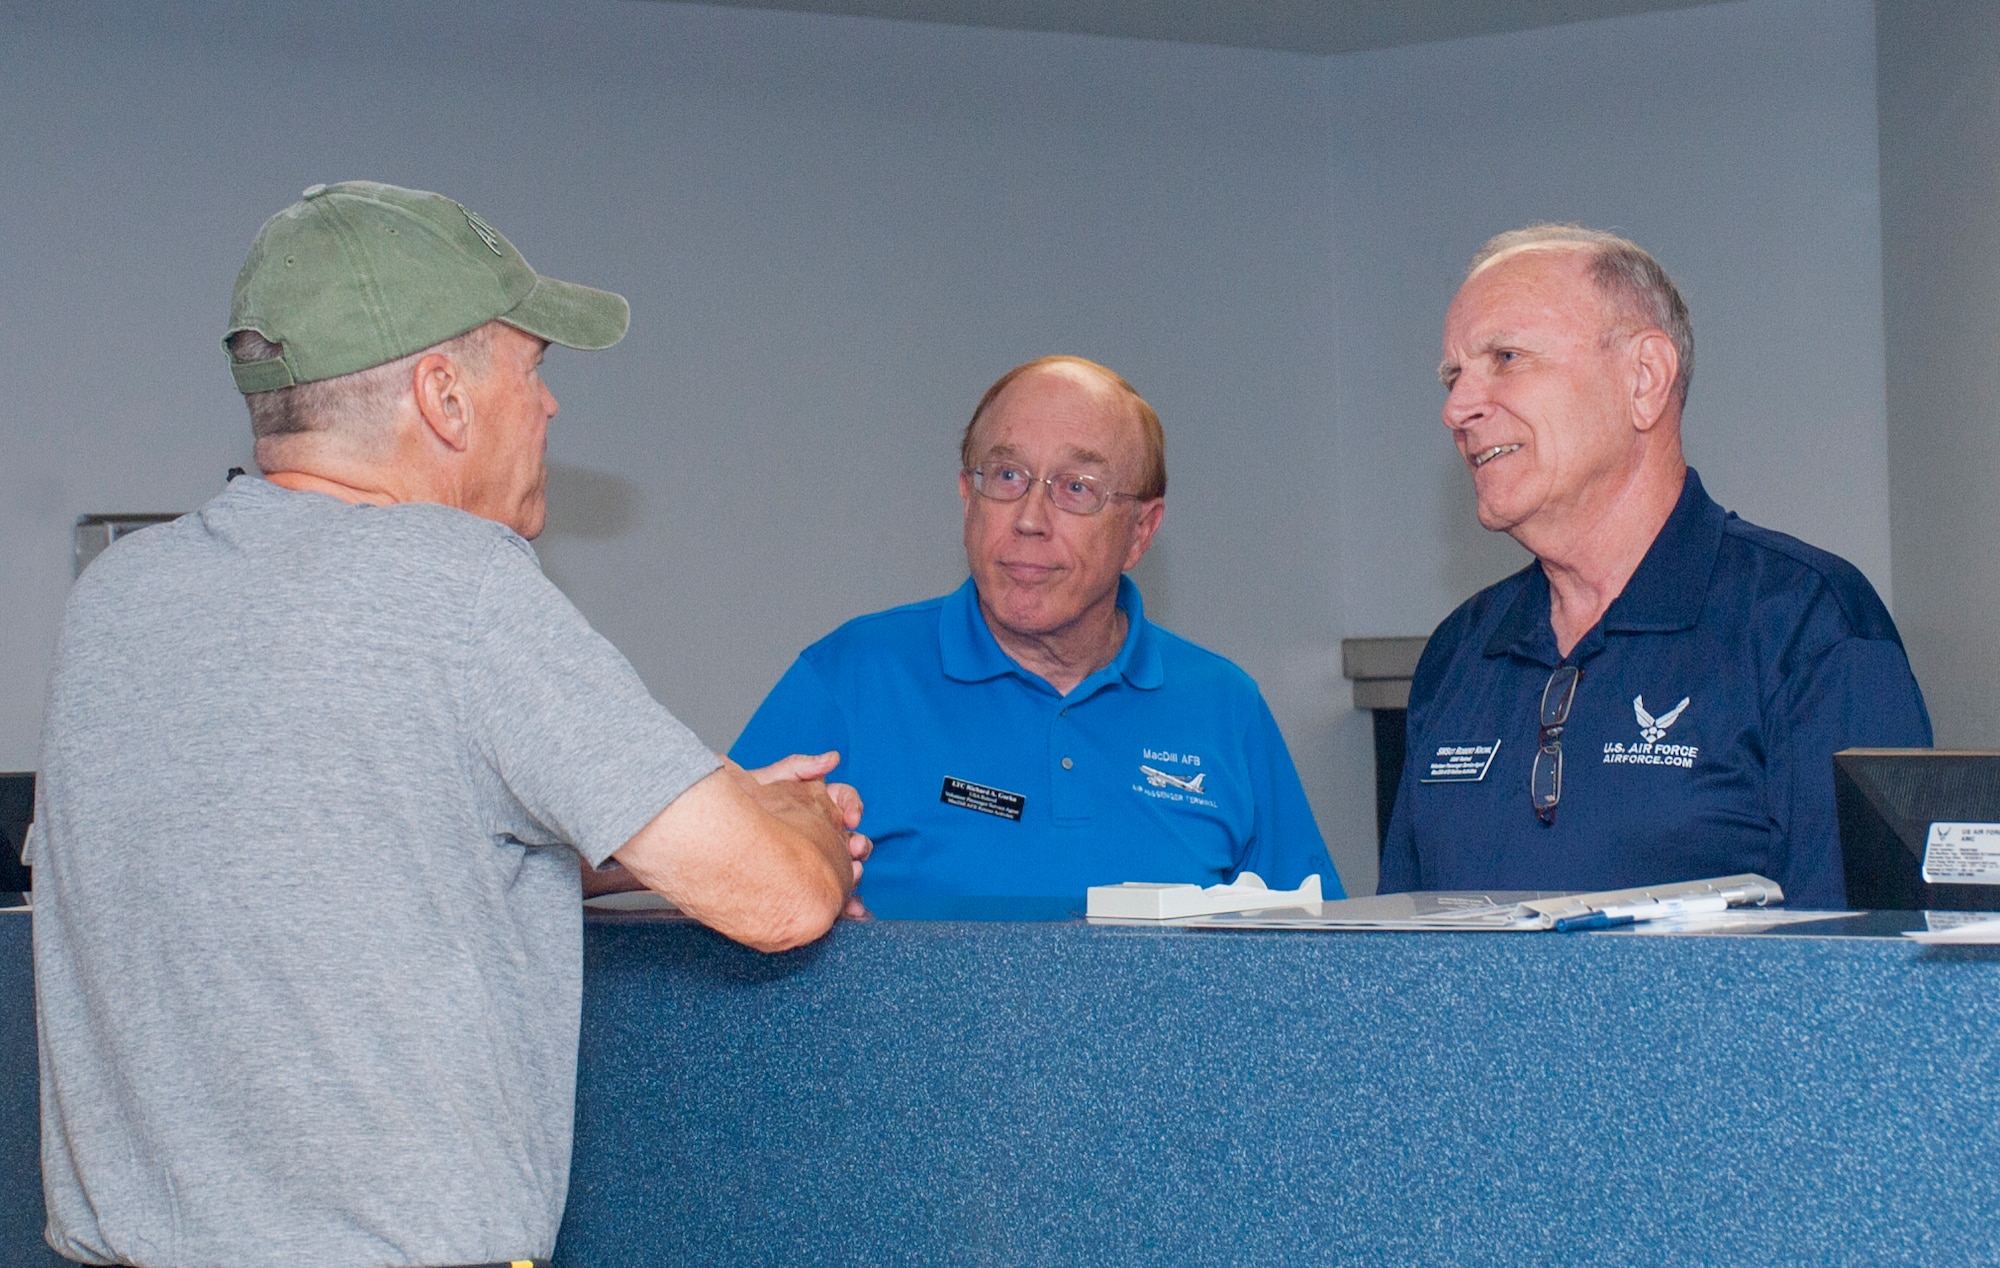 Retired U.S. Army Lt. Col Richard Gorka, center, and retired U.S. Air Force Senior Master Sgt. Robert Krowl, right, both volunteers at the passenger terminal, assist a customer in the passenger terminal at MacDill Air Force Base, Fla., June 21, 2017. The passenger terminal has 16 volunteer veterans who assist with customer service.  (U.S. Air Force photo by Airman 1st Class Mariette Adams)